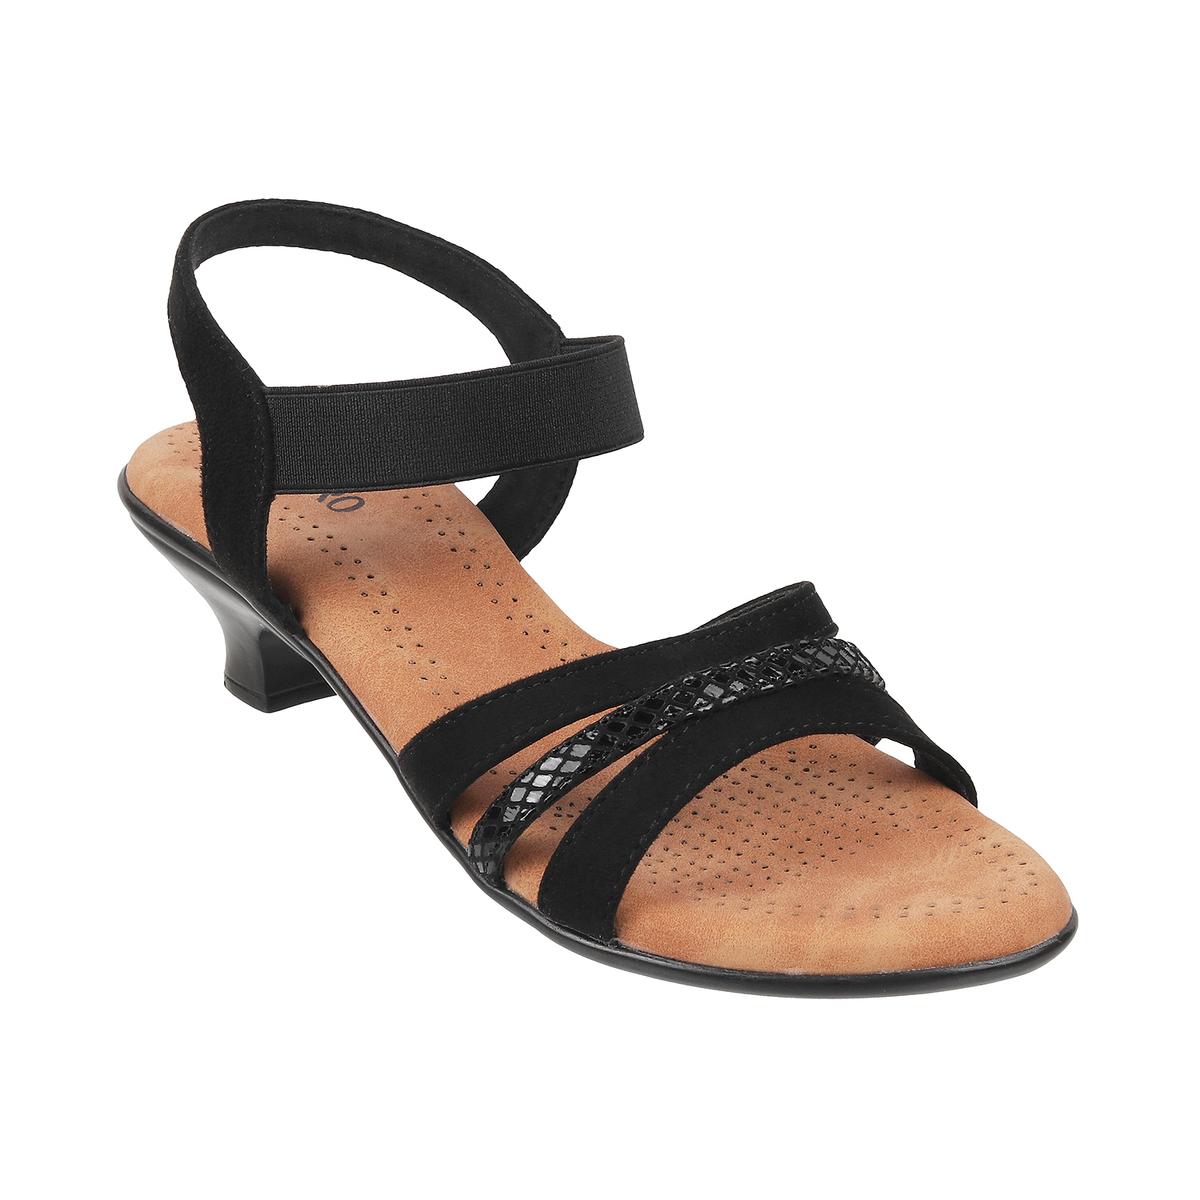 Mochi Shoes - Shop for Mochi Shoes Online in India | Myntra